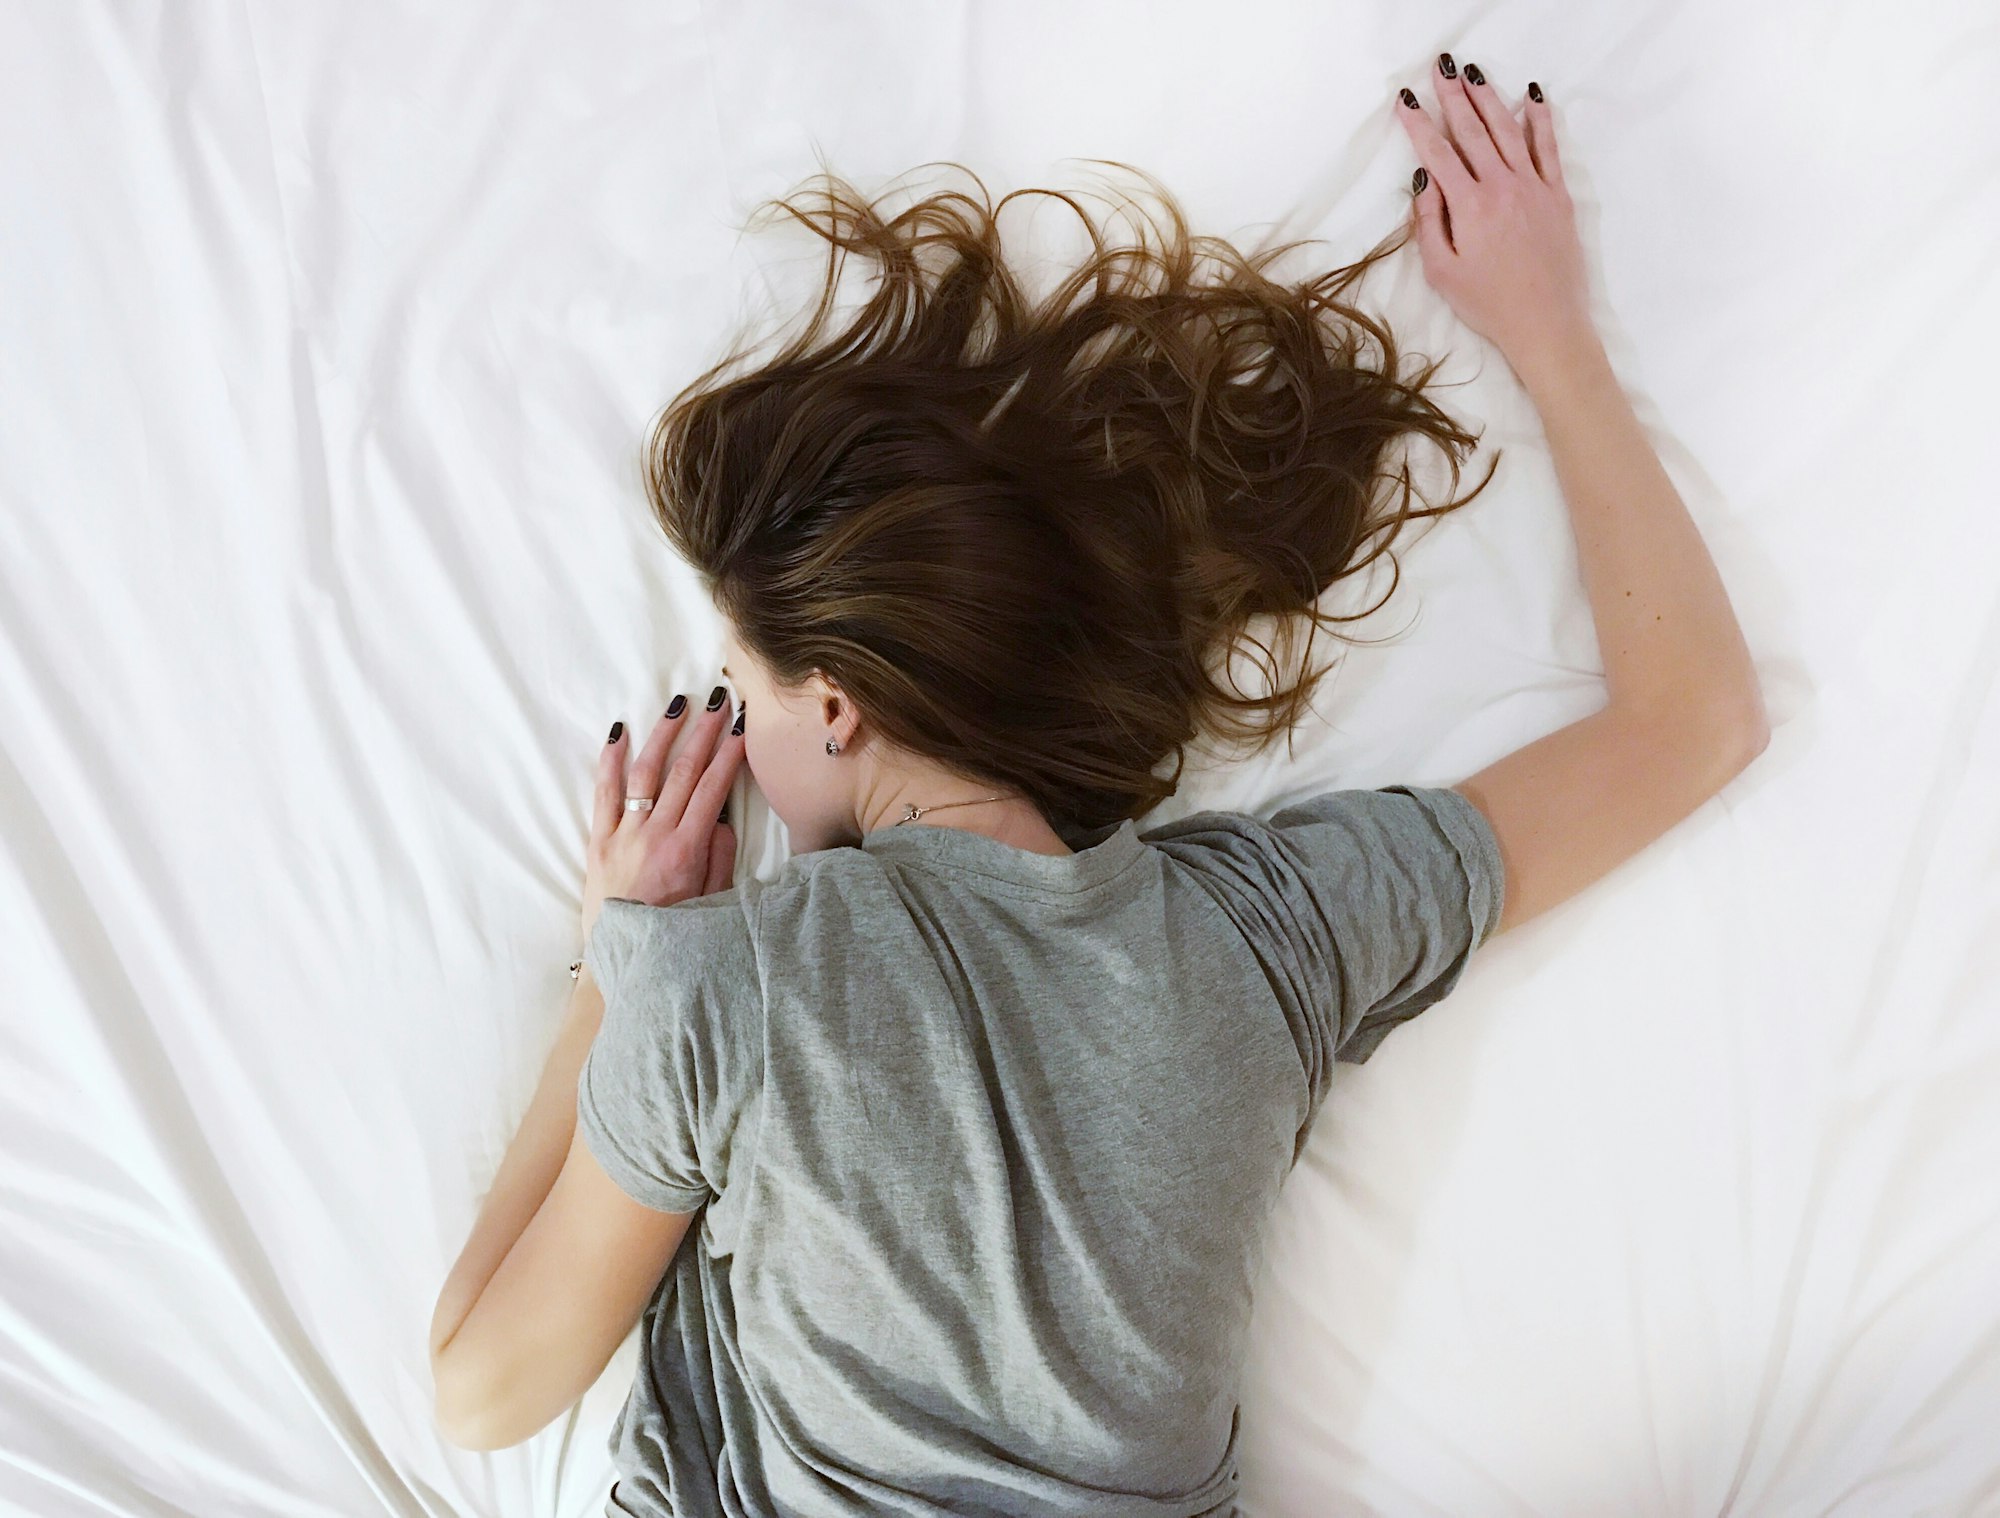 The Mindful Approach to a Good Night's Sleep